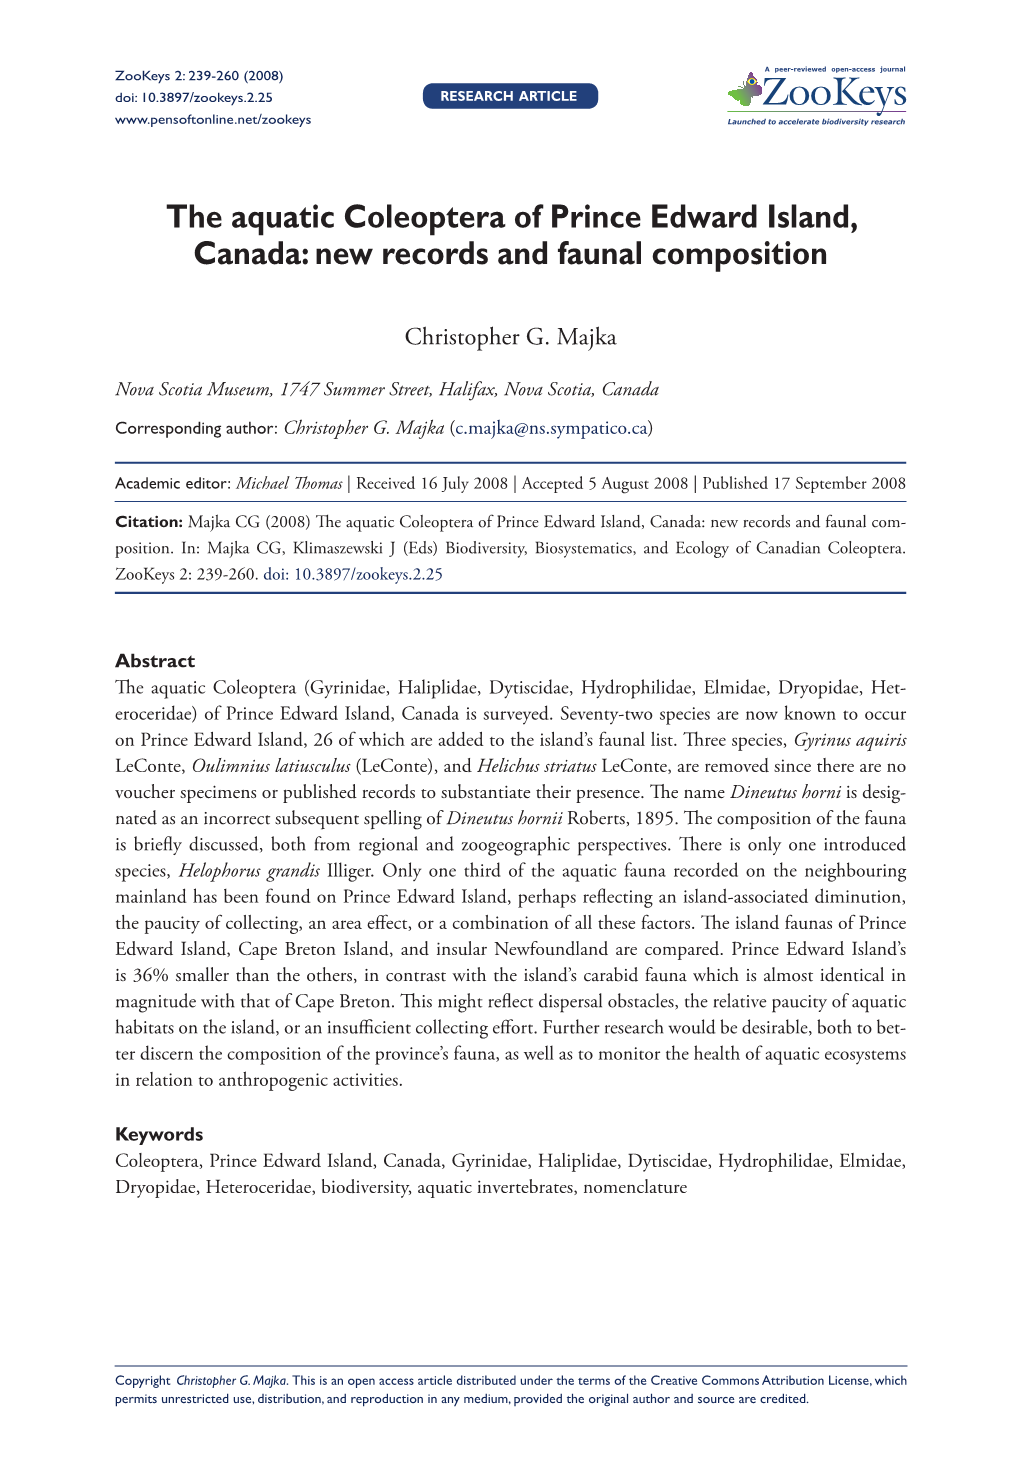 The Aquatic Coleoptera of Prince Edward Island, Canada: New Records and Faunal Composition